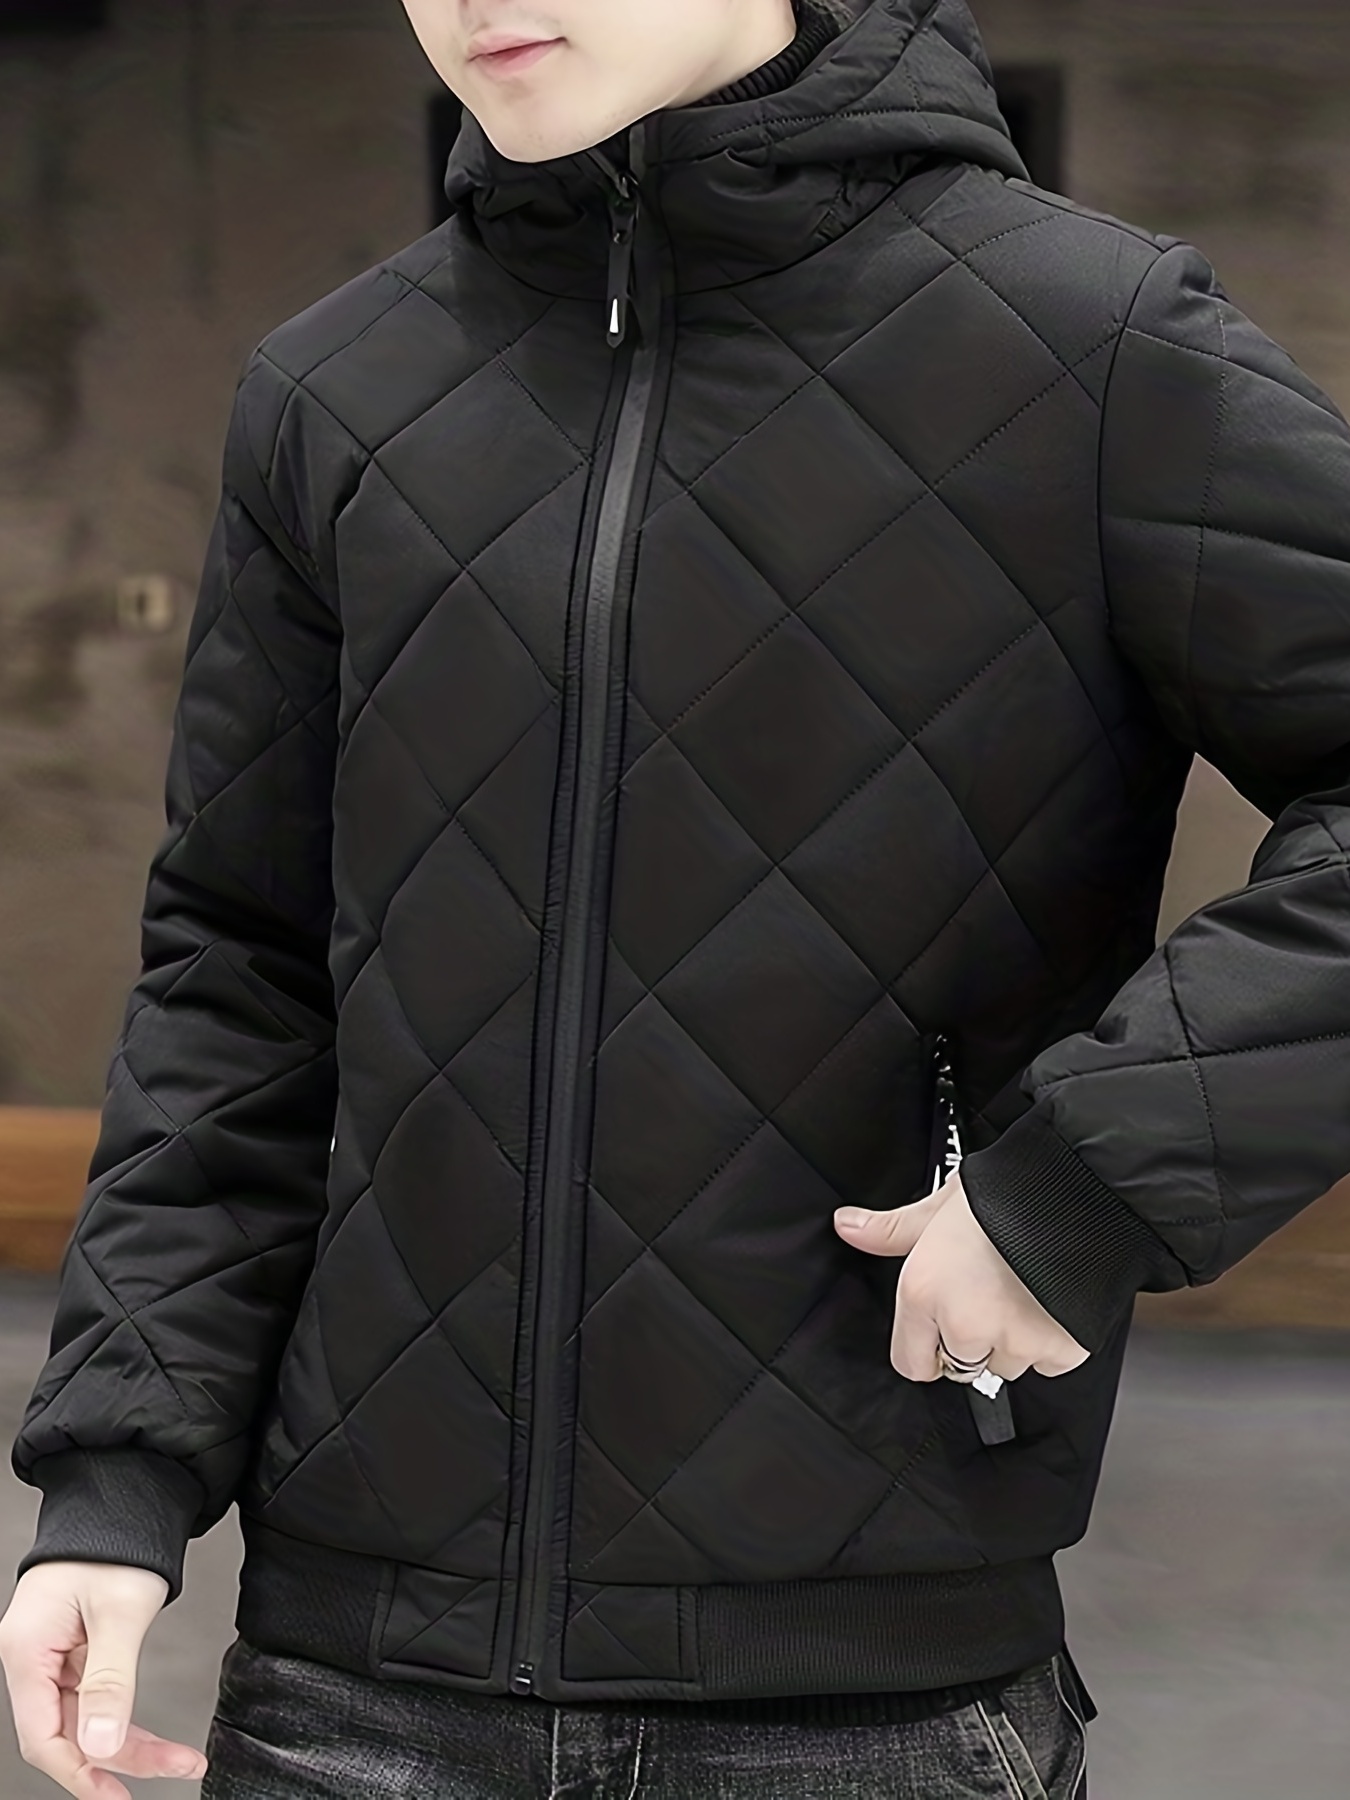 Warm Winter Plush Hooded Jacket, Men's Casual Zip Up Warm Quilted Jacket  For Fall Winter Outdoor